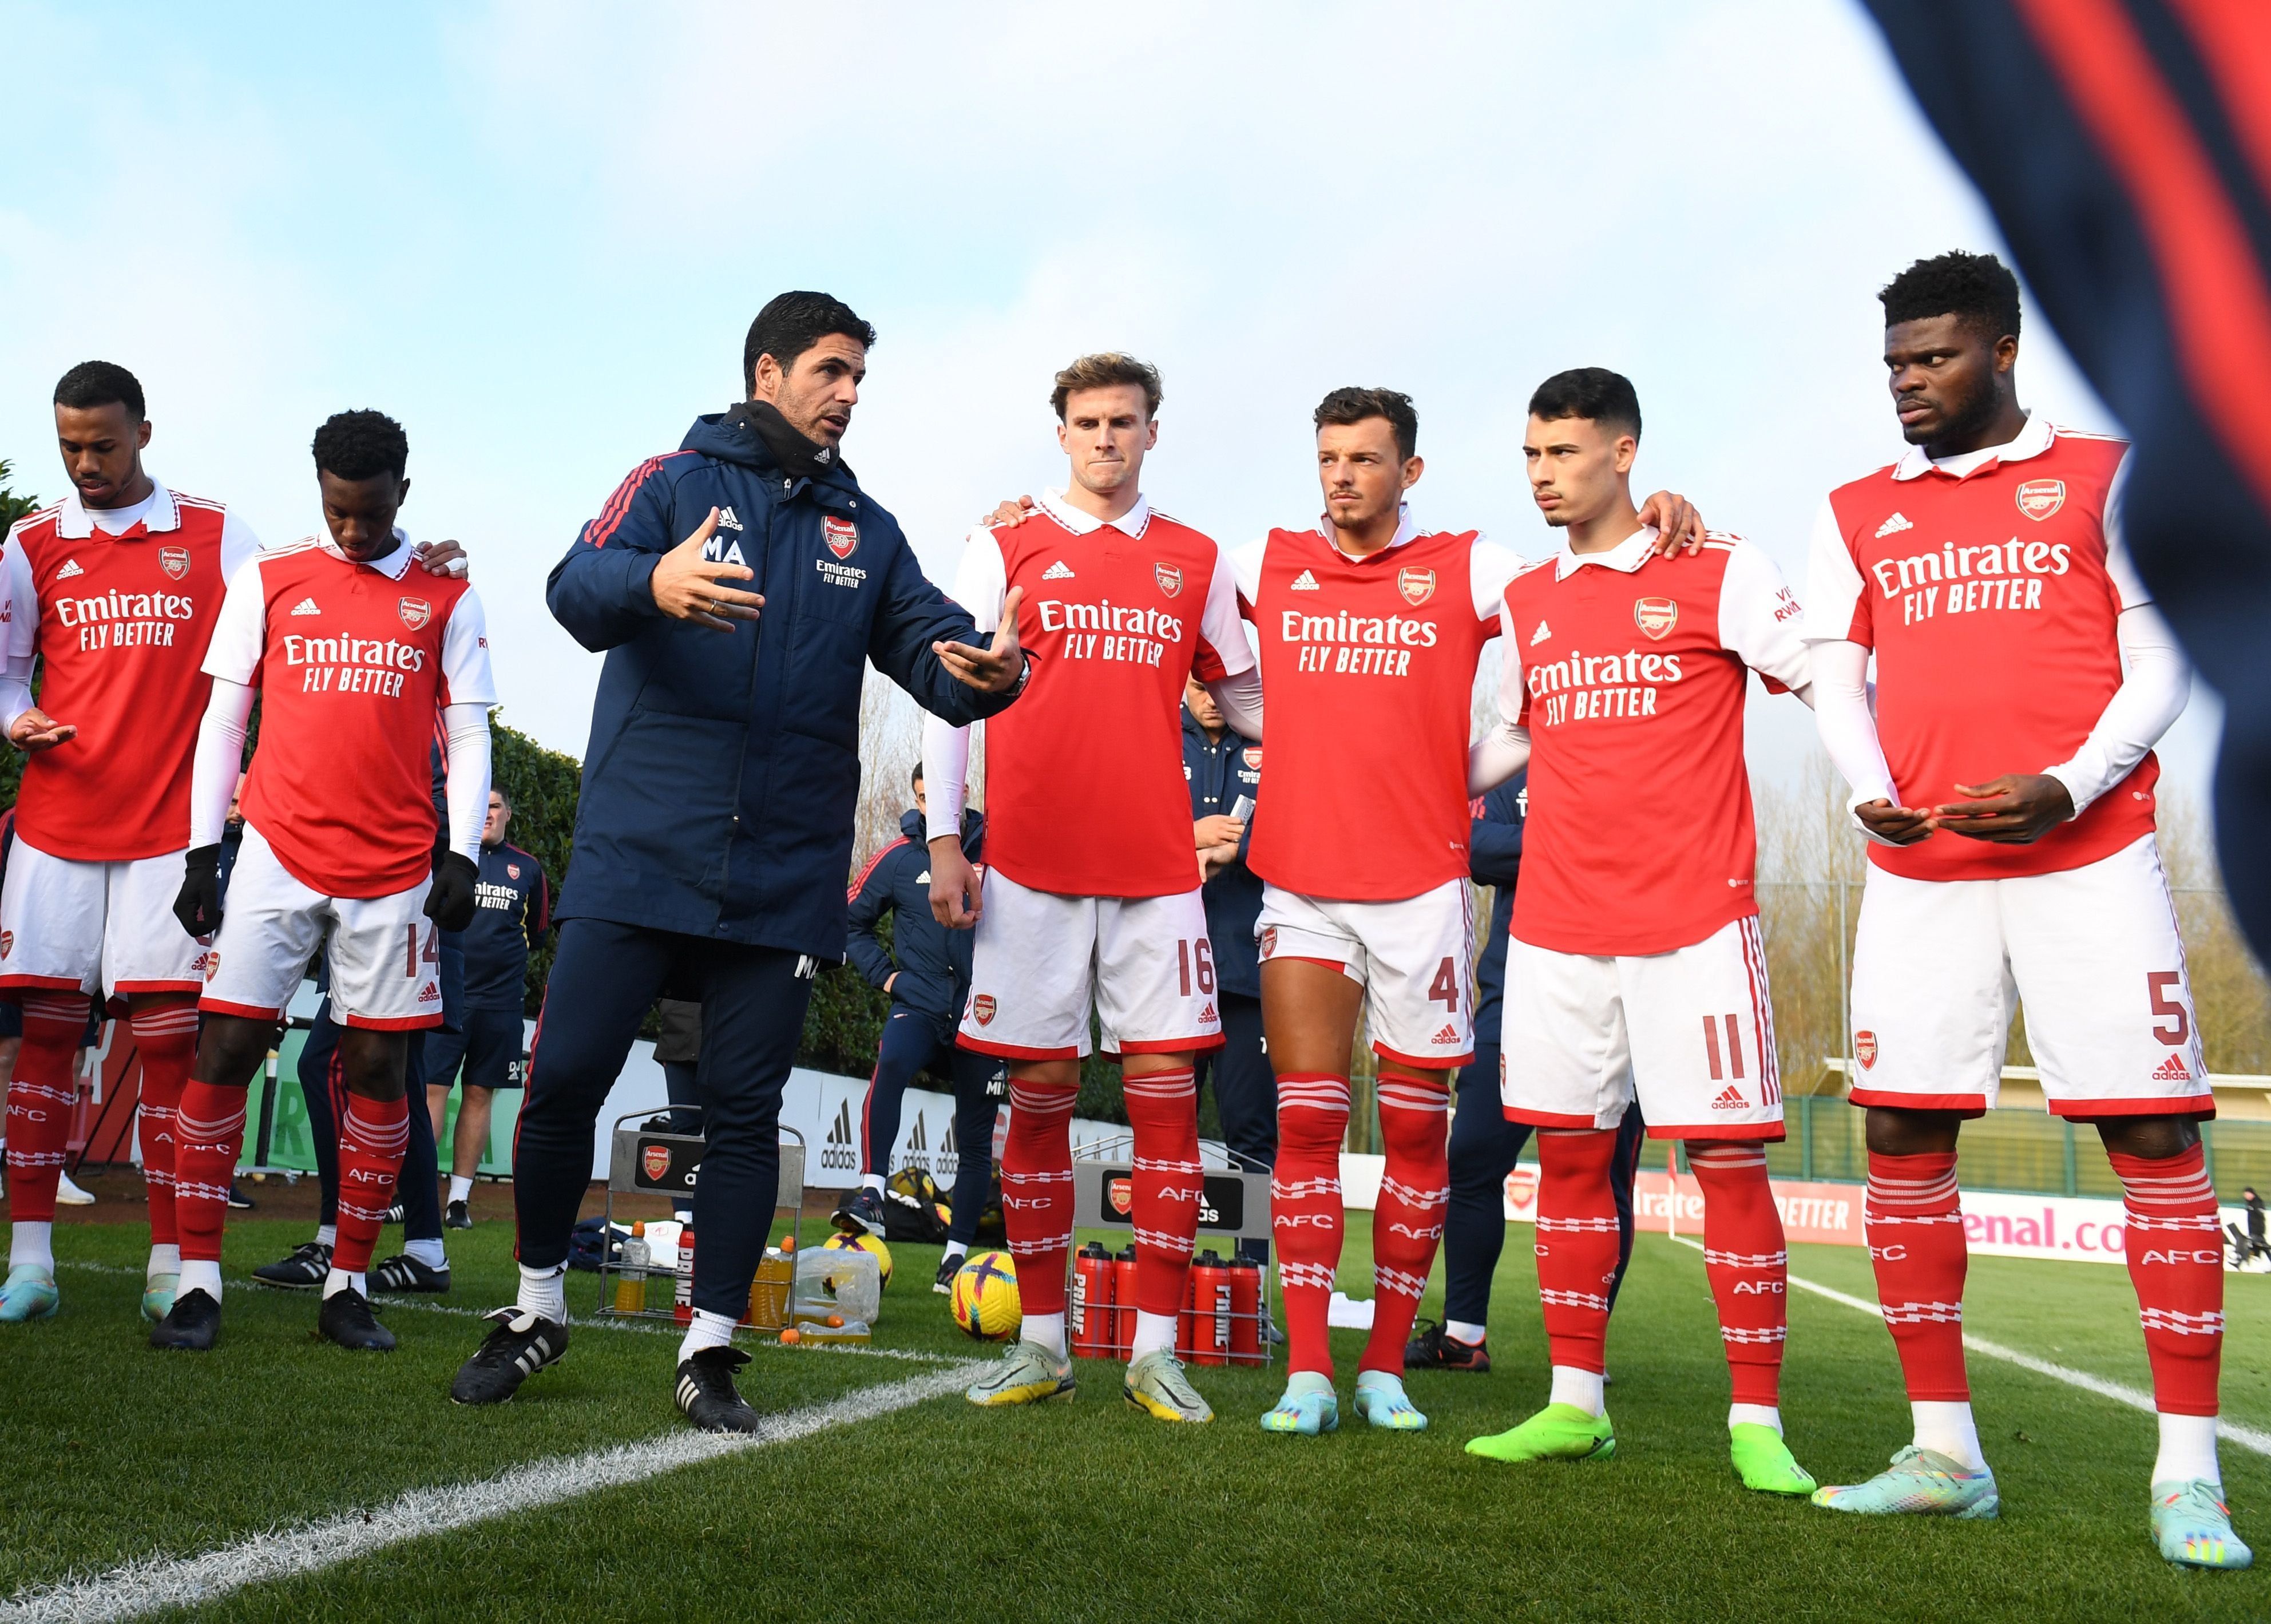 Mikel Arteta talks to his players before a mid-week friendly on Wednesday